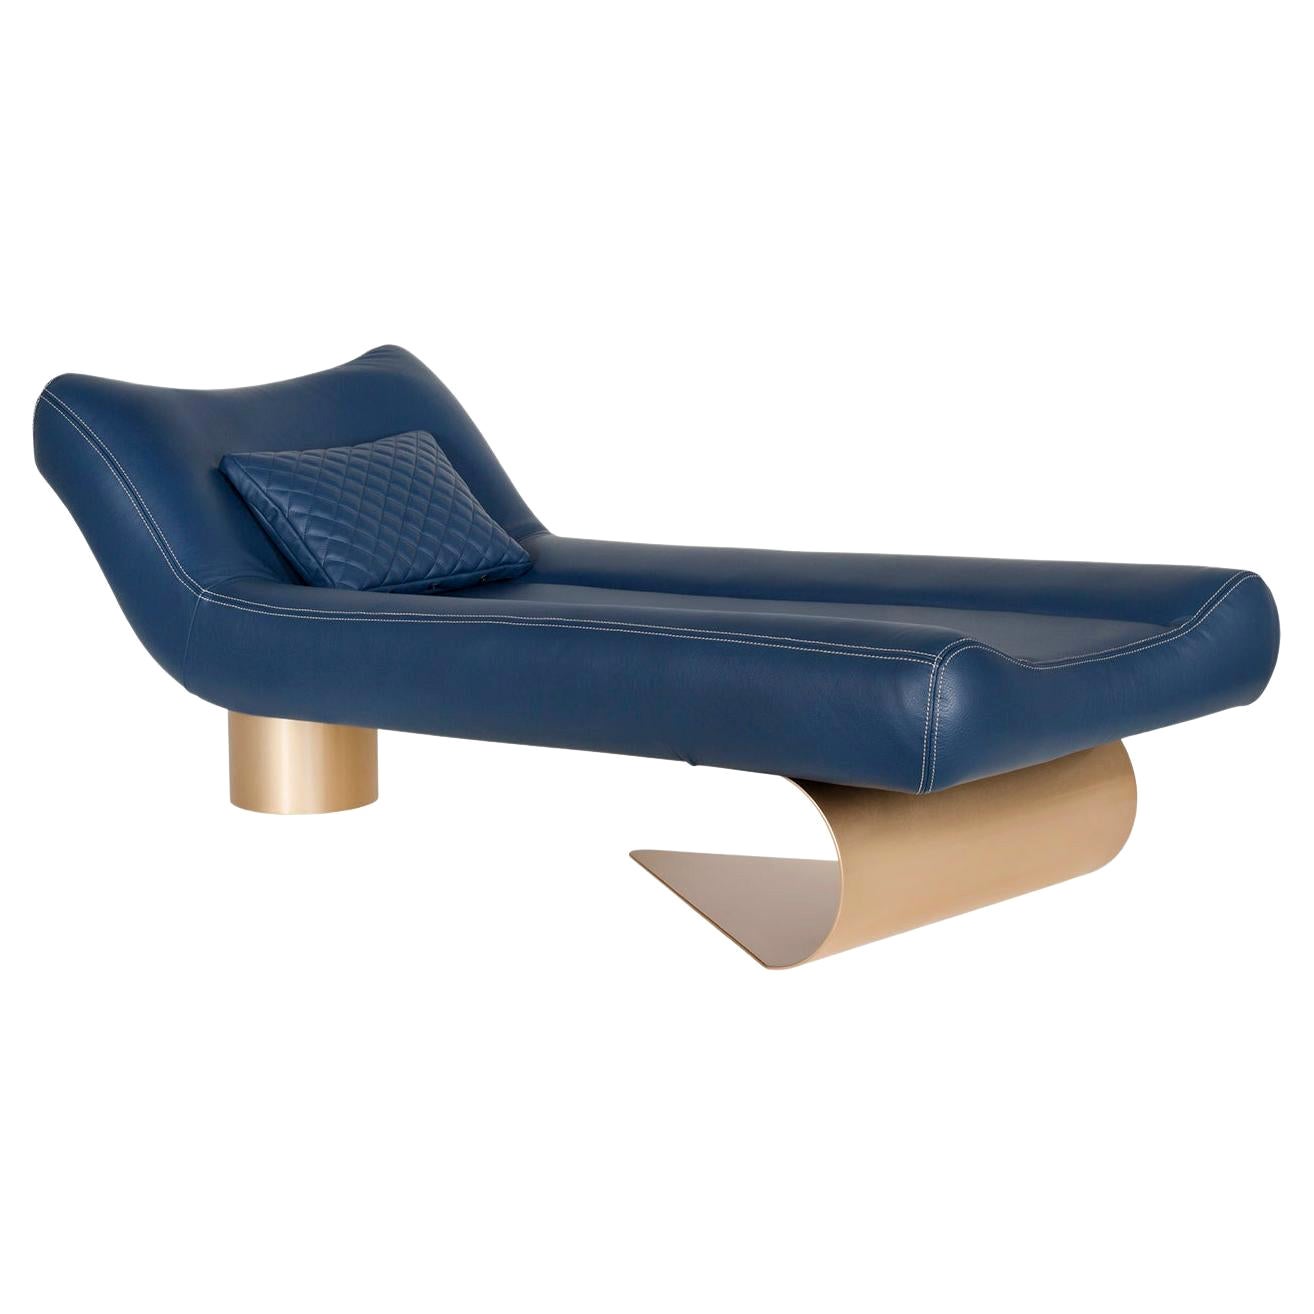 Greenapple Chaise Longue, Tágide Chaise, Dark Blue Leather, Handmade in Portugal